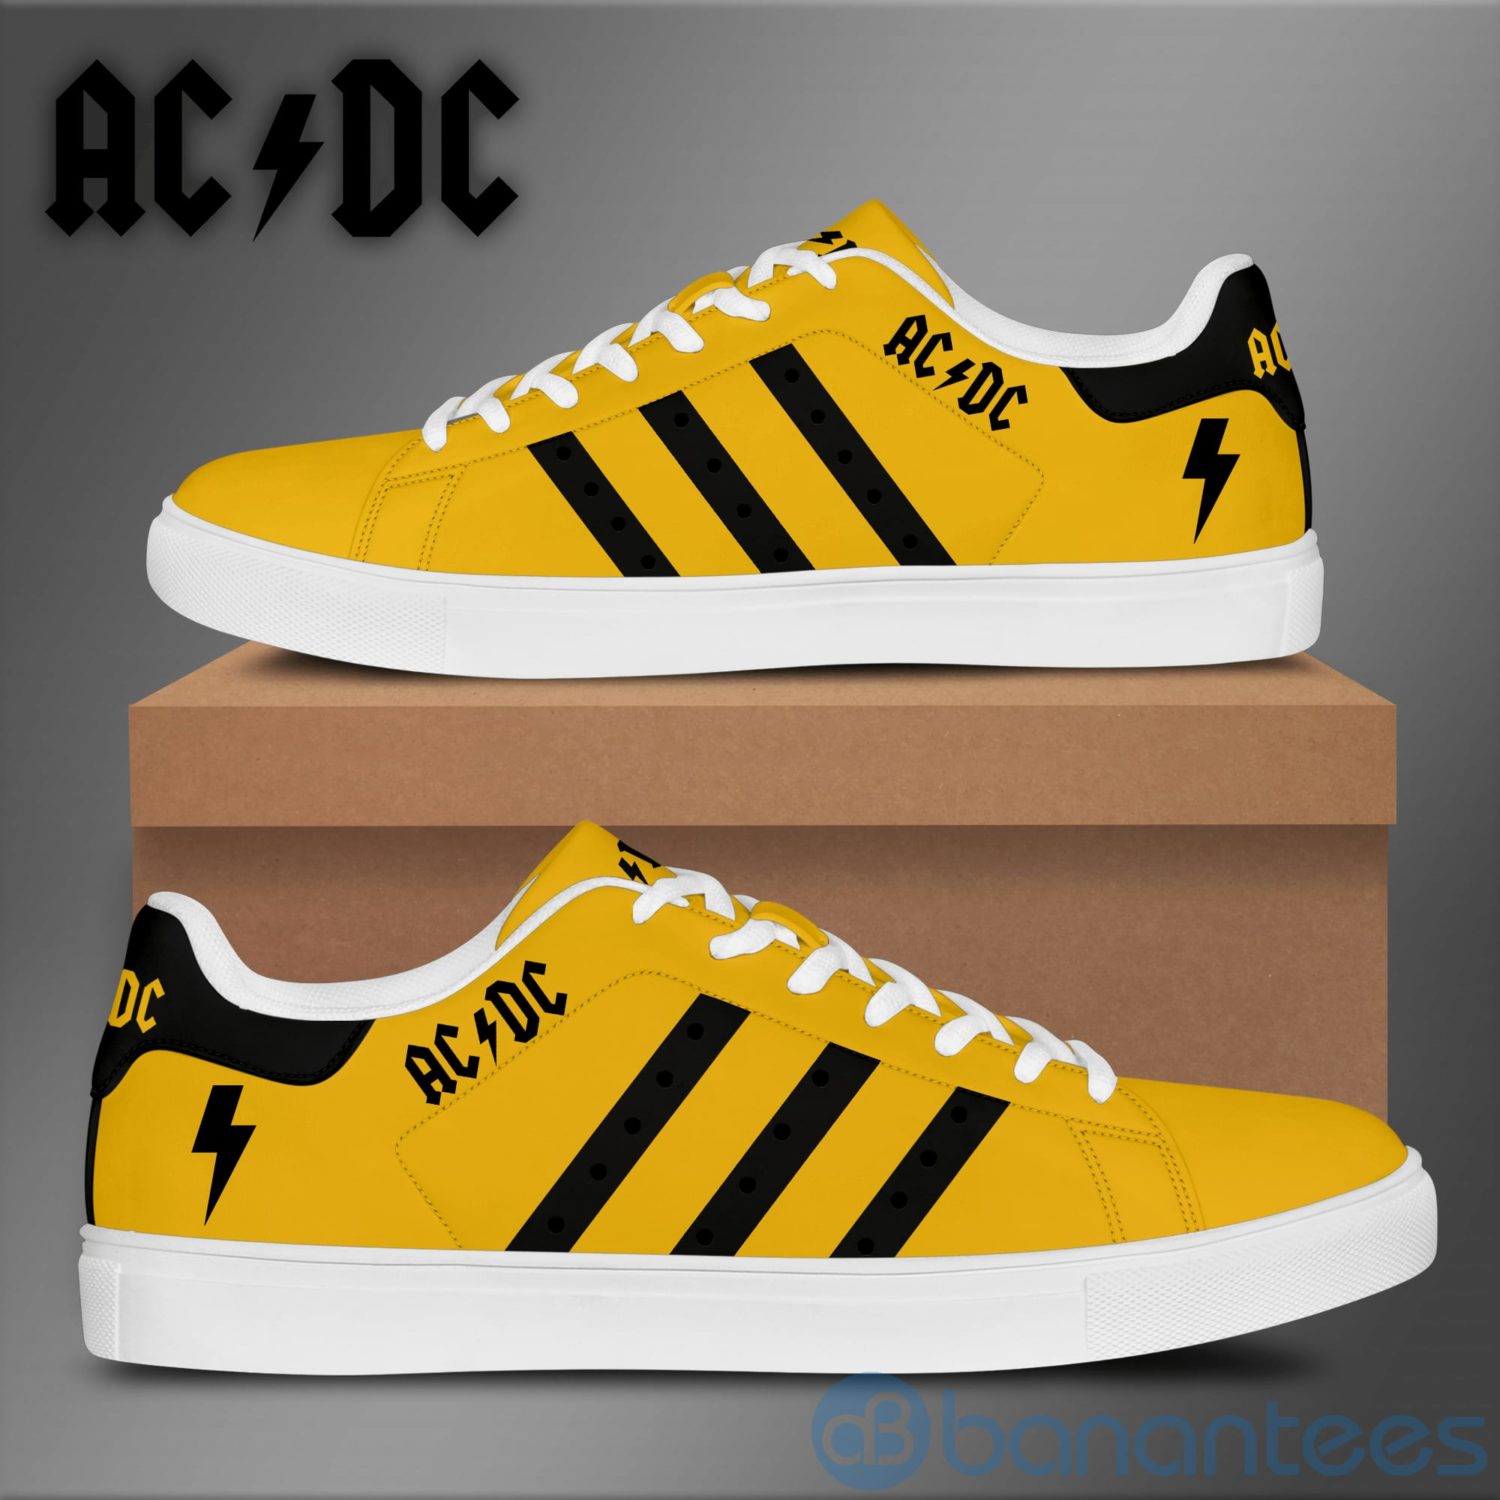 Acdc Low Top Skate Shoes